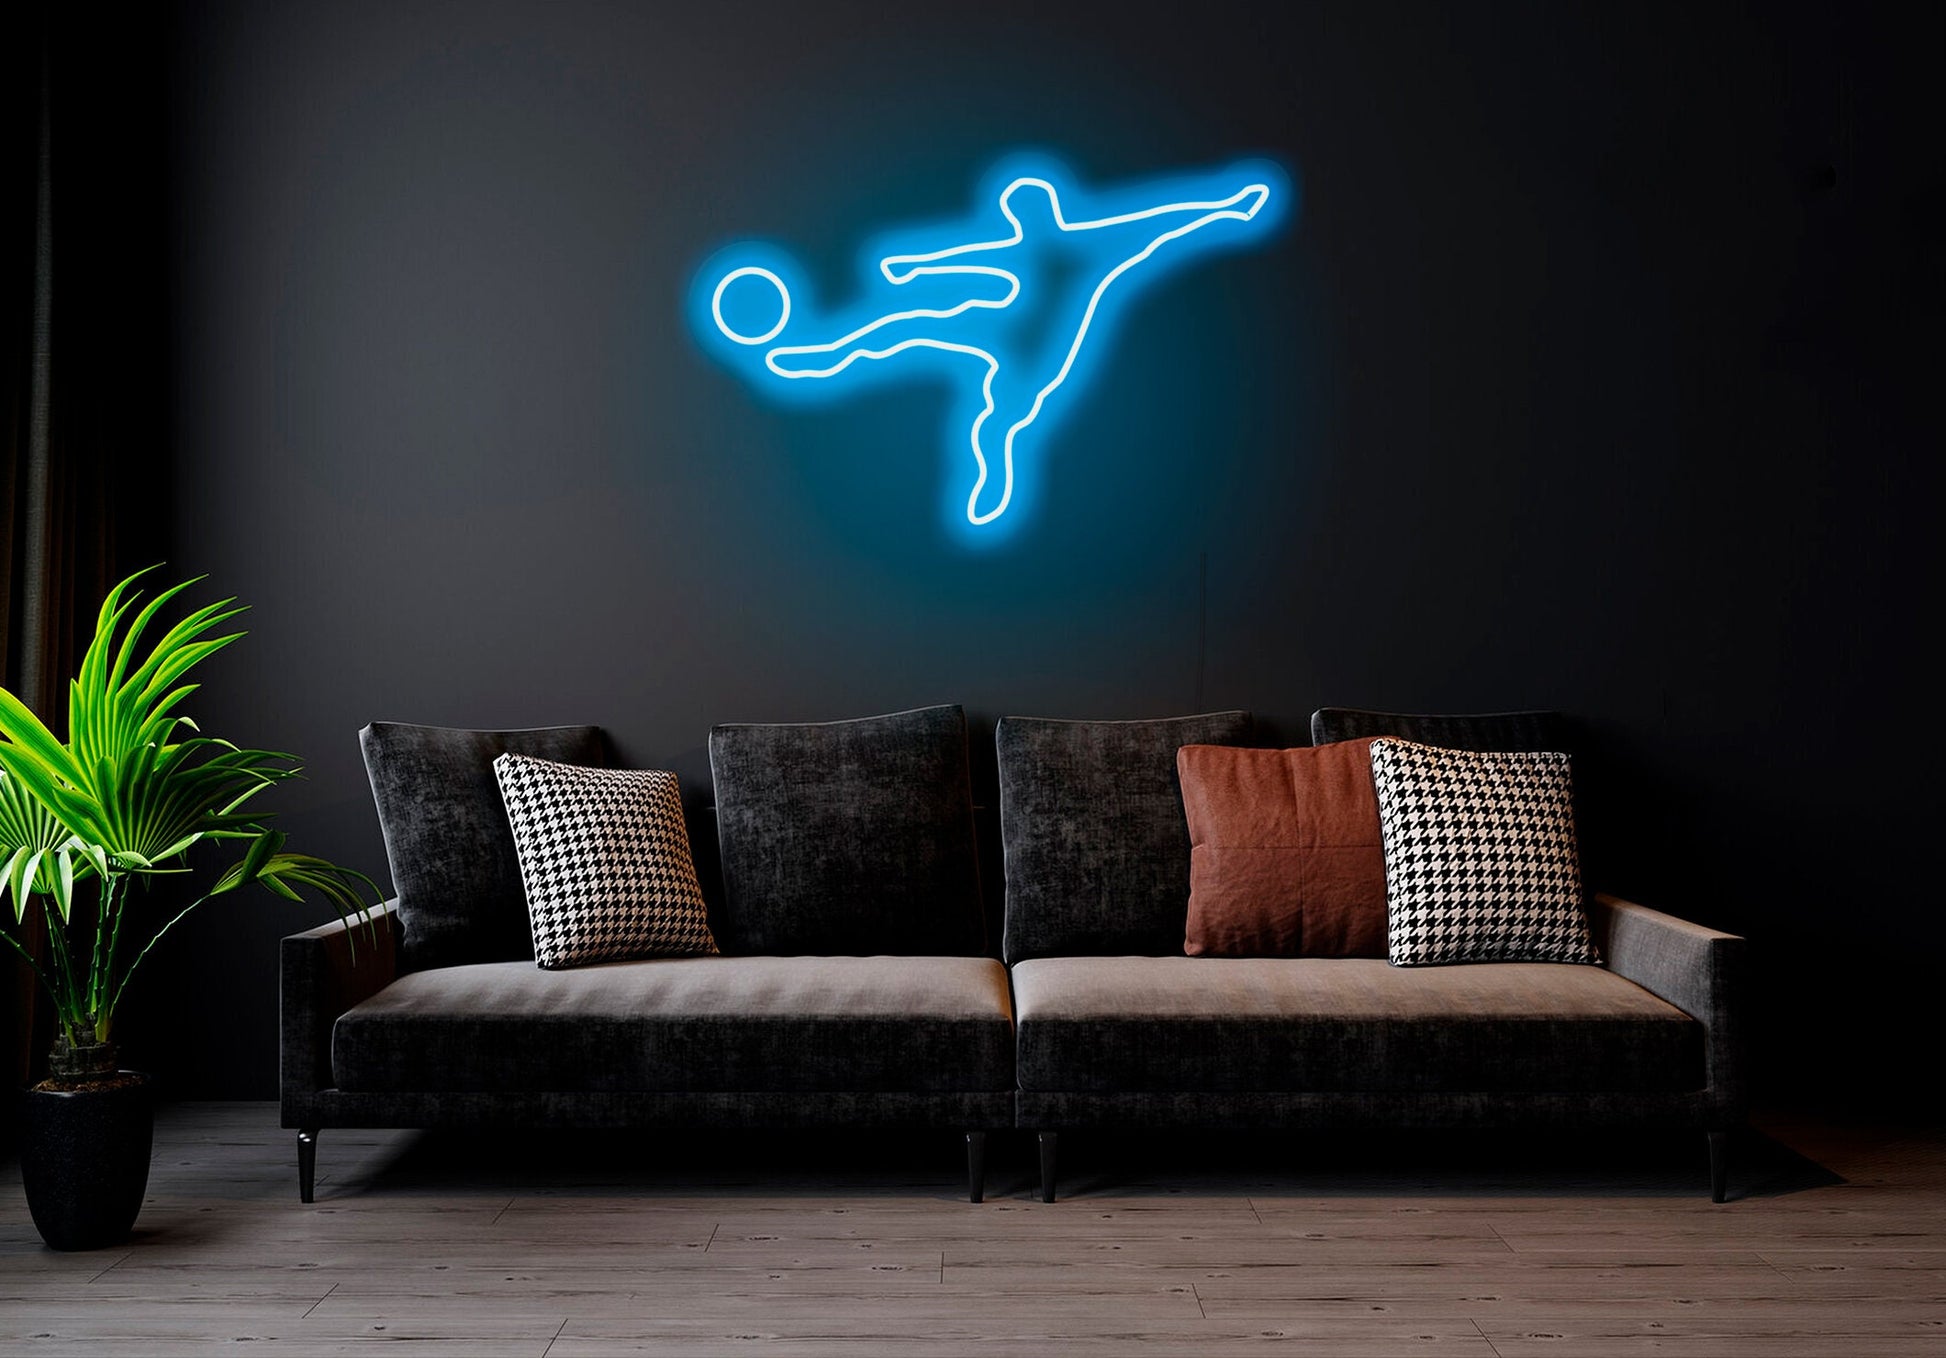 Soccer player - LED Neon Sign, Footballer wall decor Sport led neon sign Decor for kids room Sport signs Unbreakable neon sign